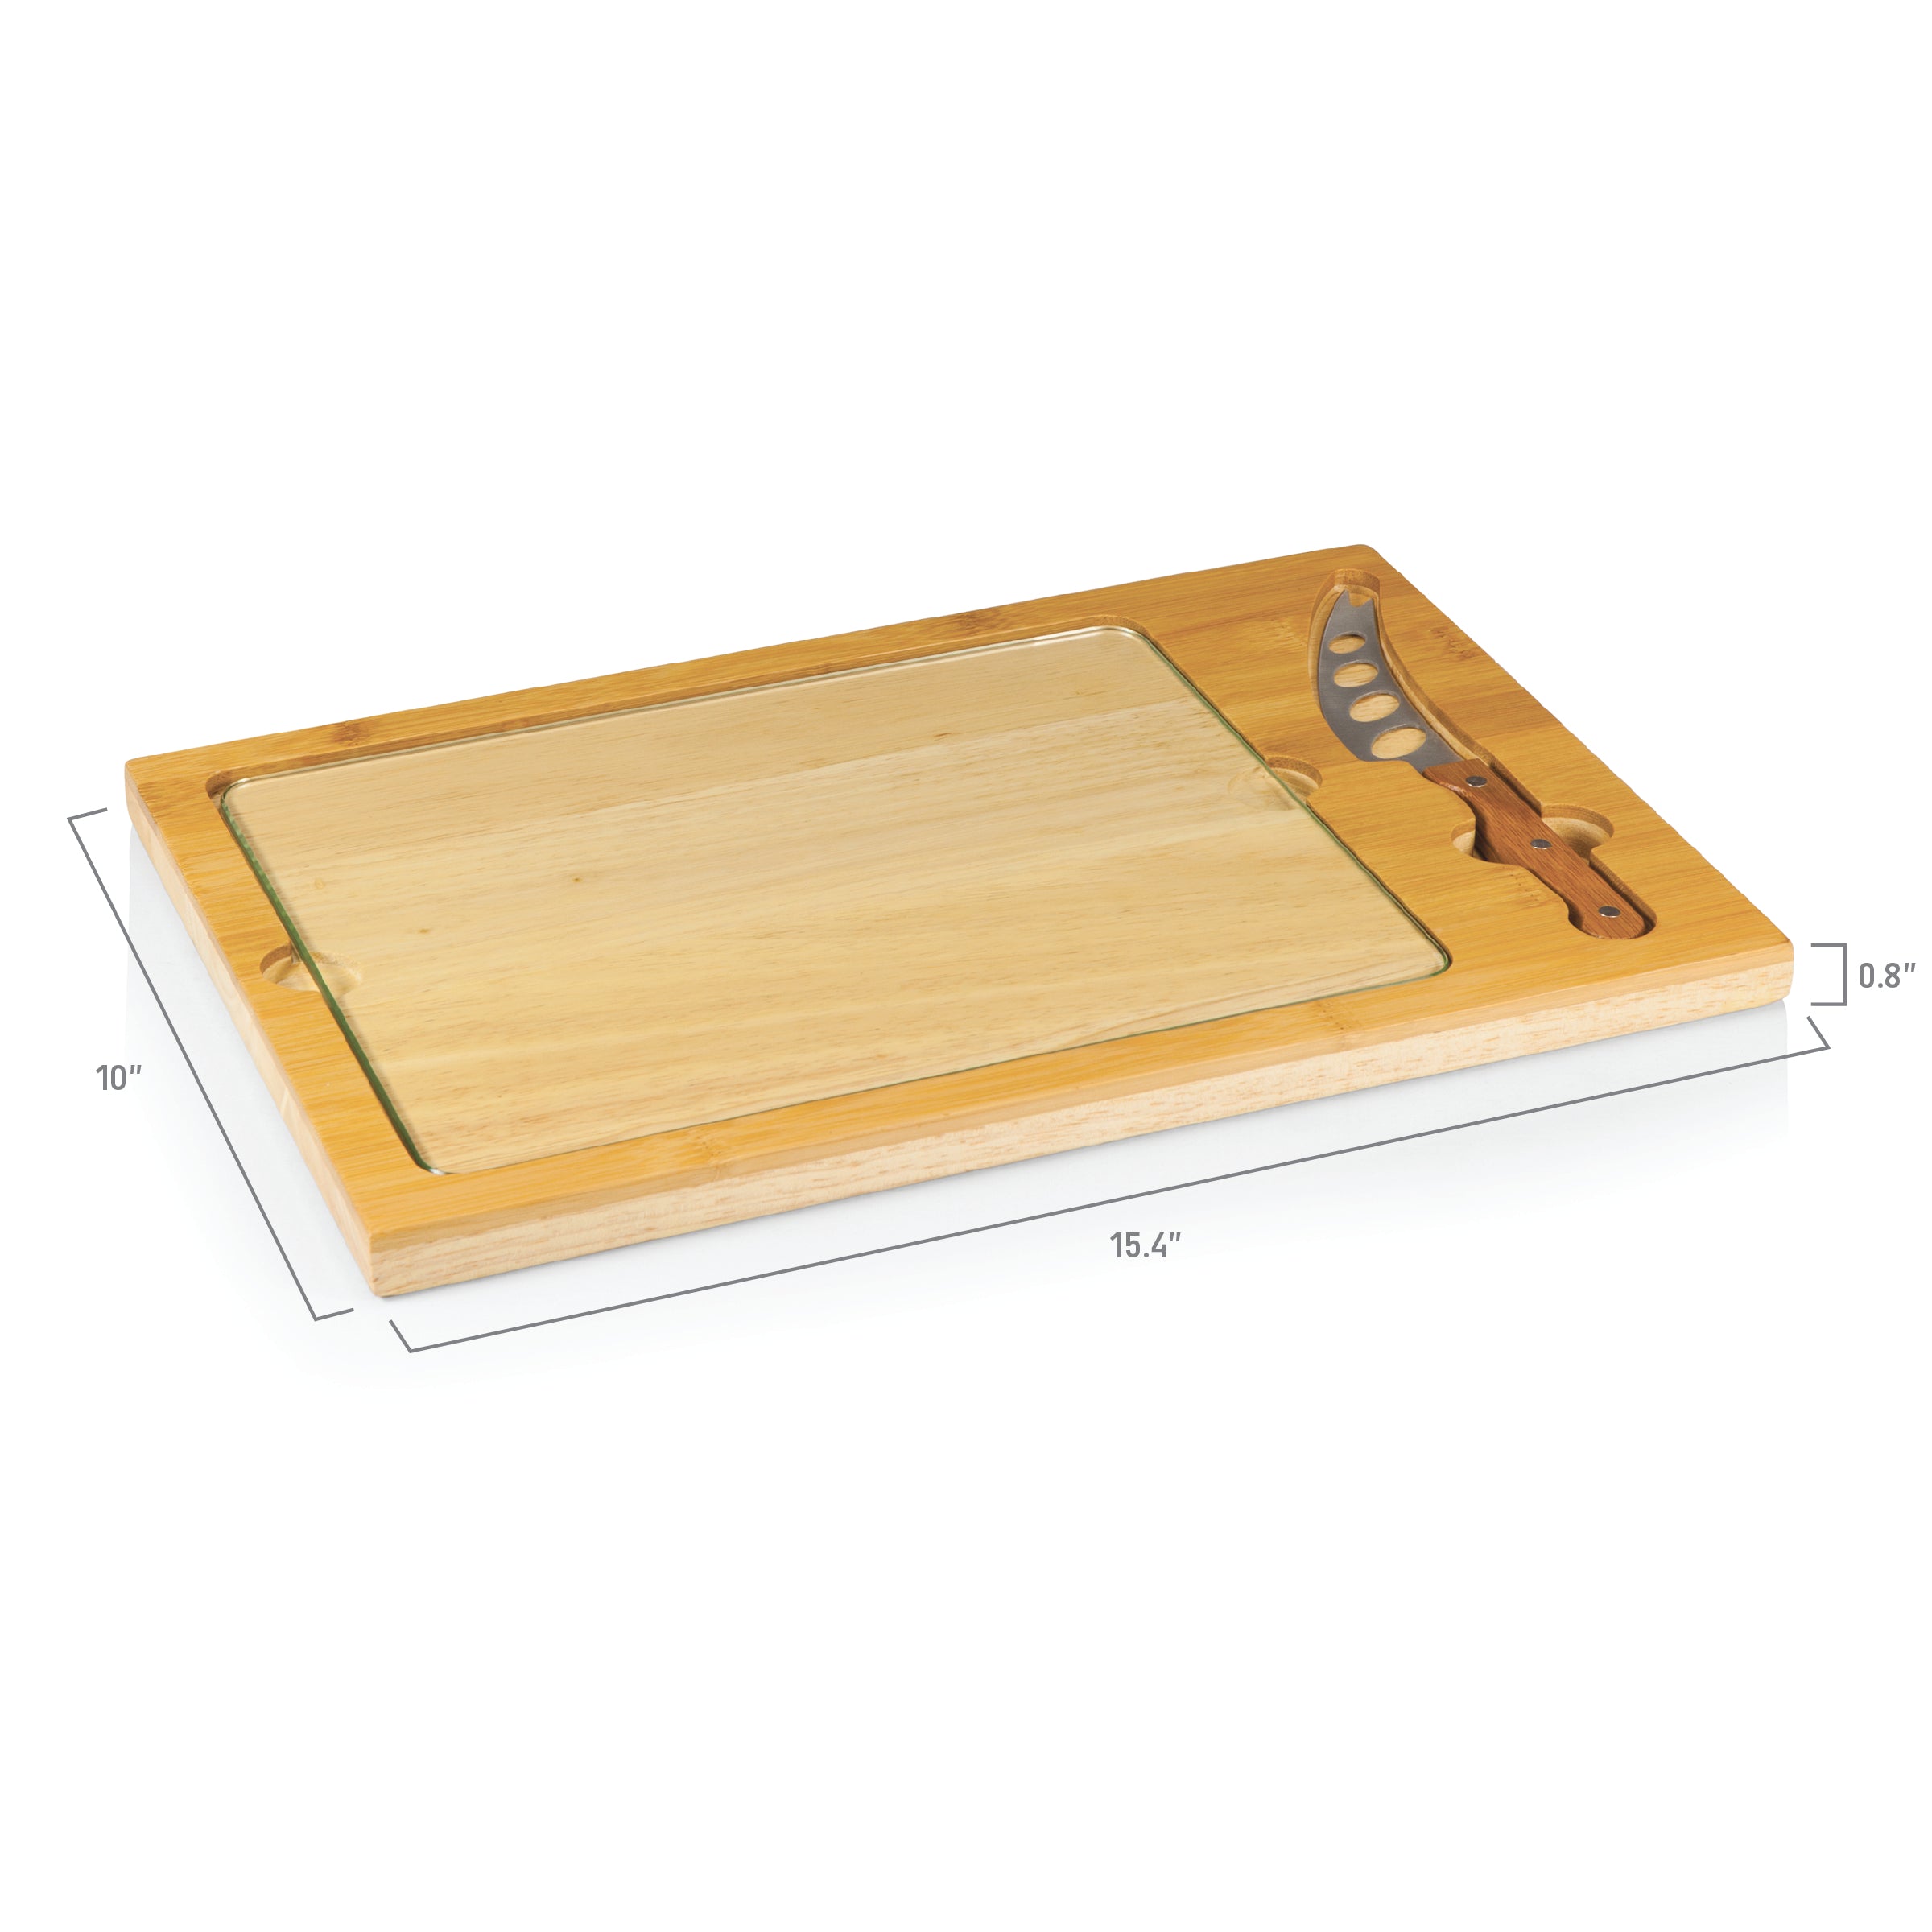 Hockey Rink - Colorado Avalanche - Icon Glass Top Cutting Board & Knife Set